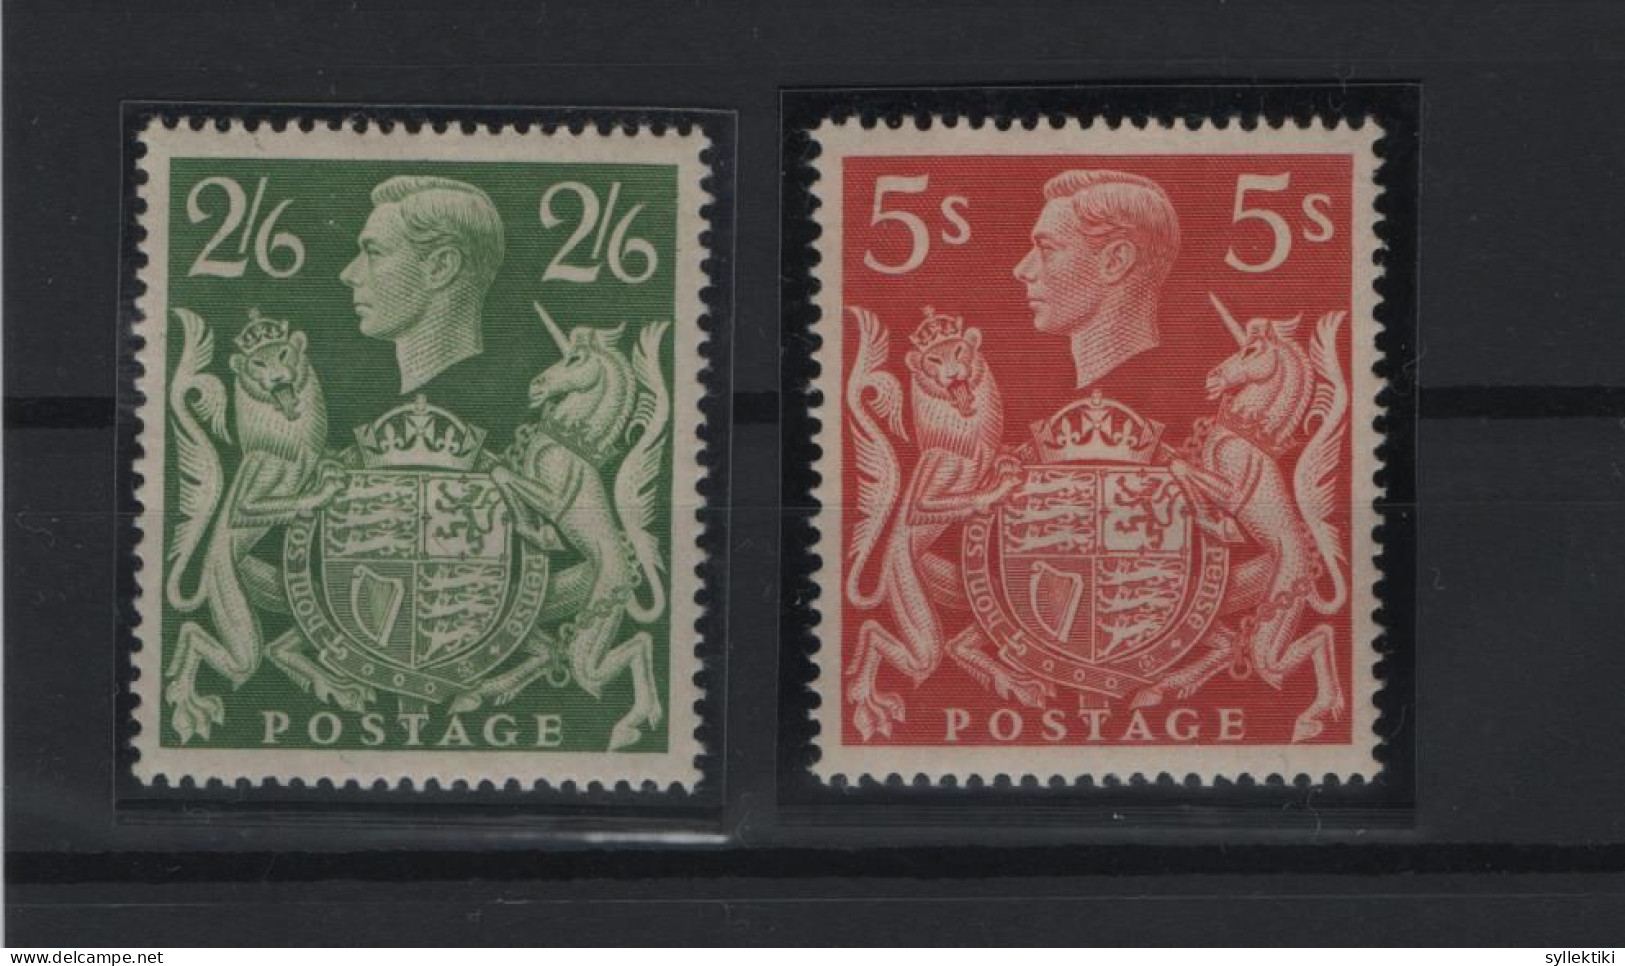 GREAT BRITAIN 1939 KGVI 2/6 & 5 SHILLINGS 2 DIFFERENT MNH STAMPS  STANLEY GIBBONS N 476b, 477  AND VALUE GBP 35.00 - Unused Stamps